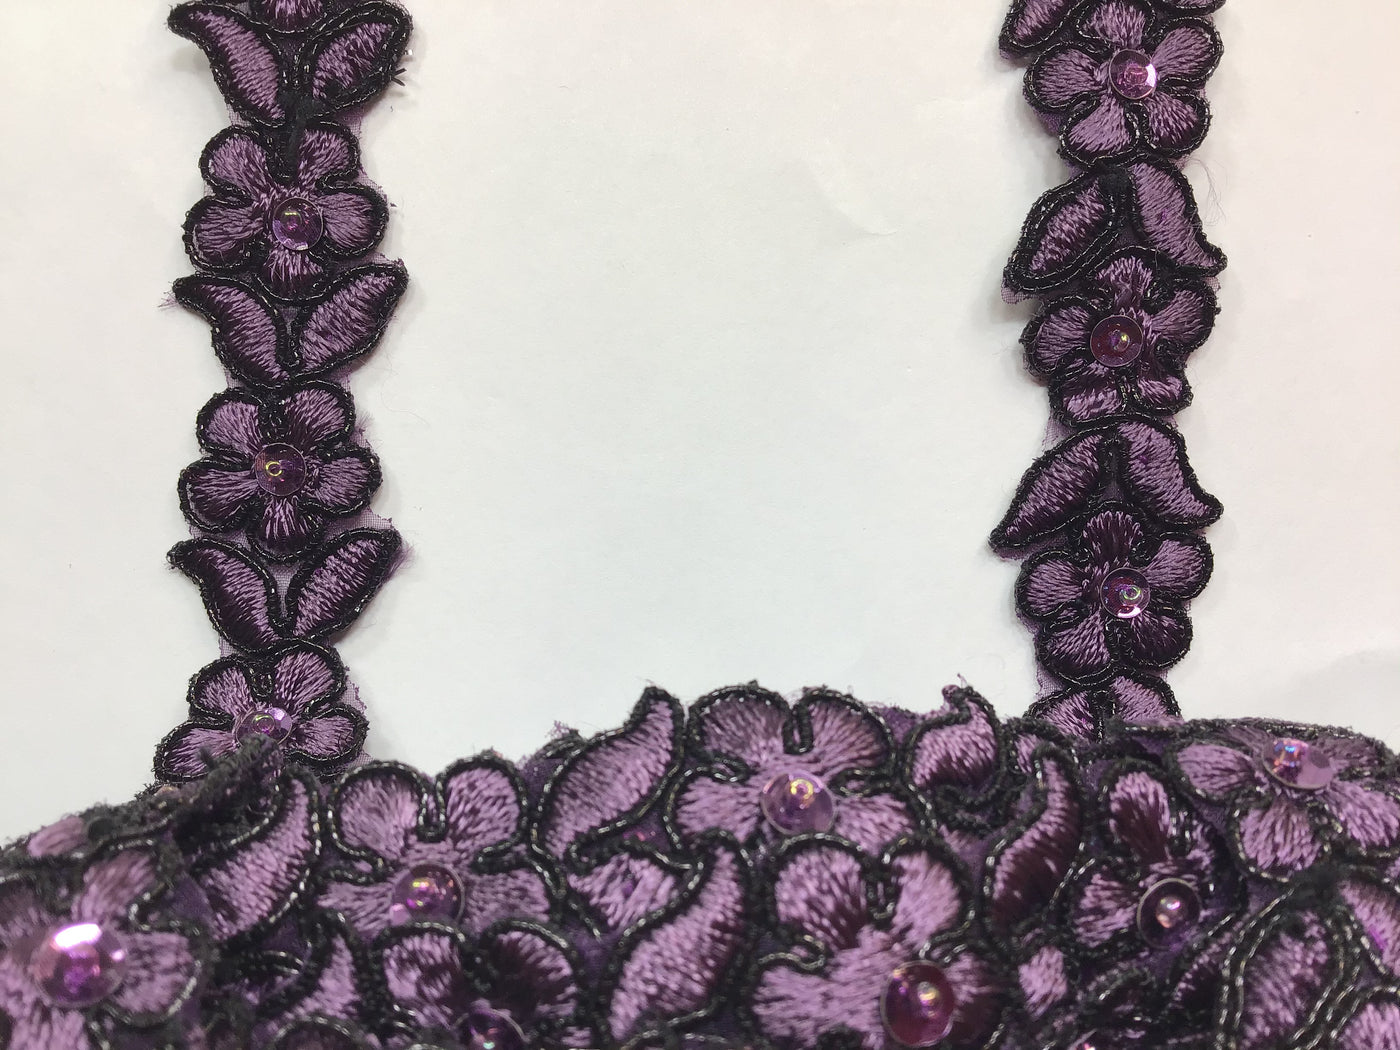 Corded, Beaded & Embroidered Plum with Metallic Trimming. Lace Usa